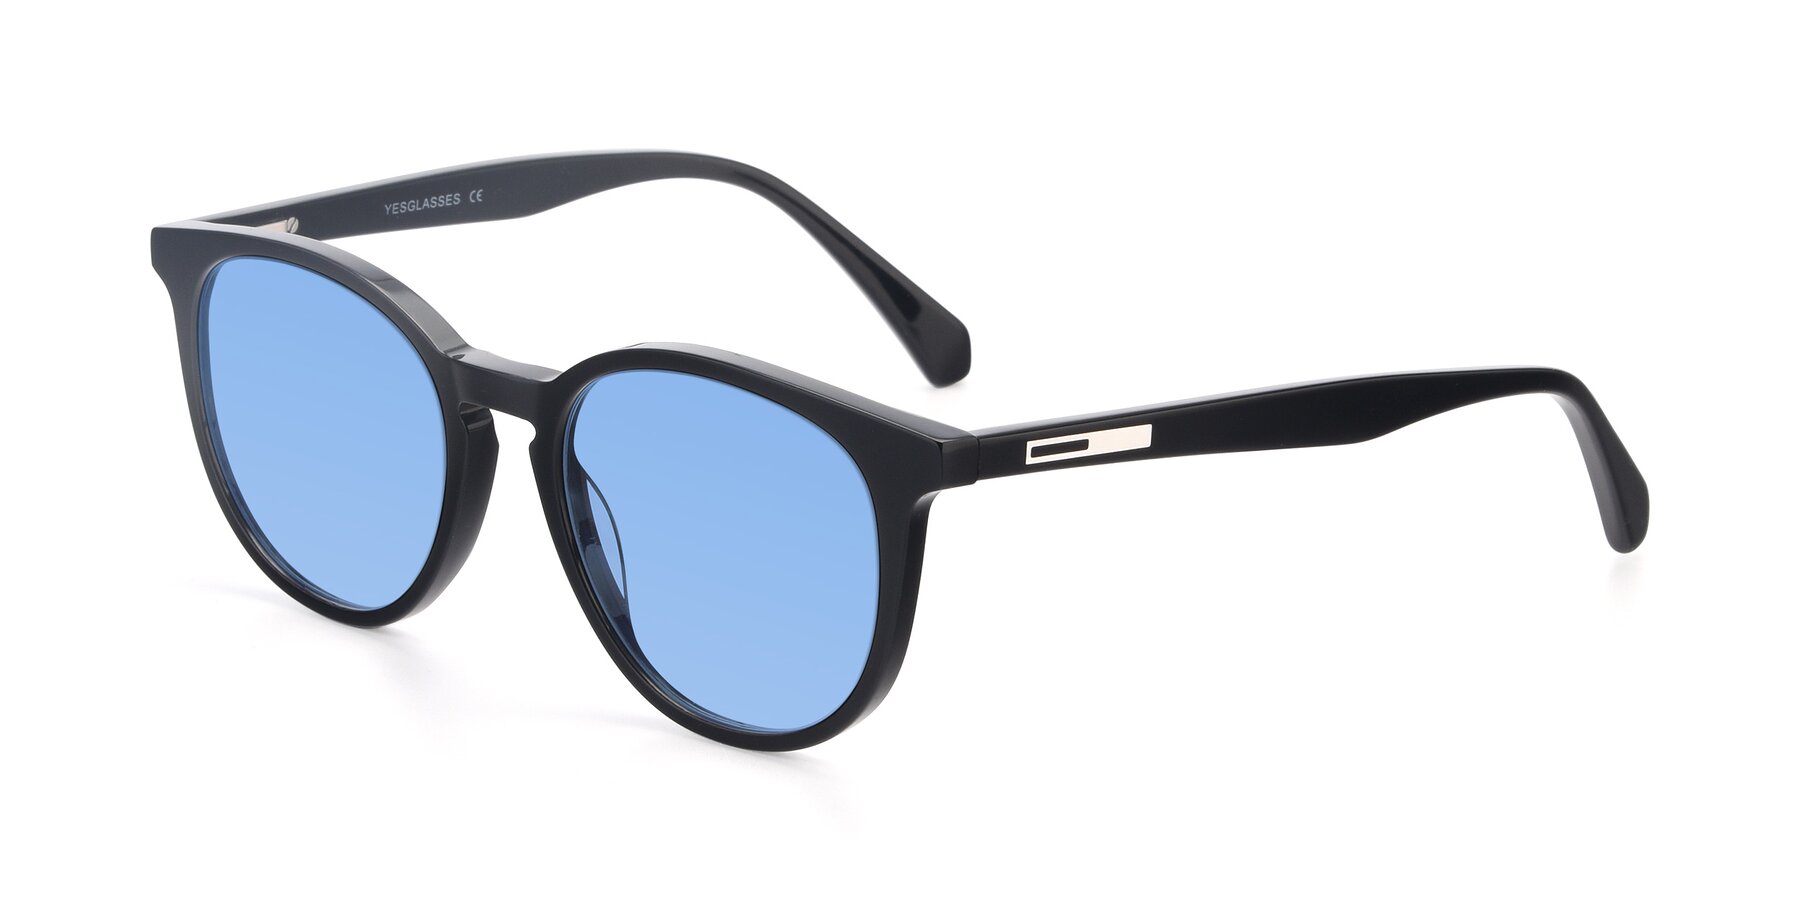 Angle of 17721 in Black with Medium Blue Tinted Lenses